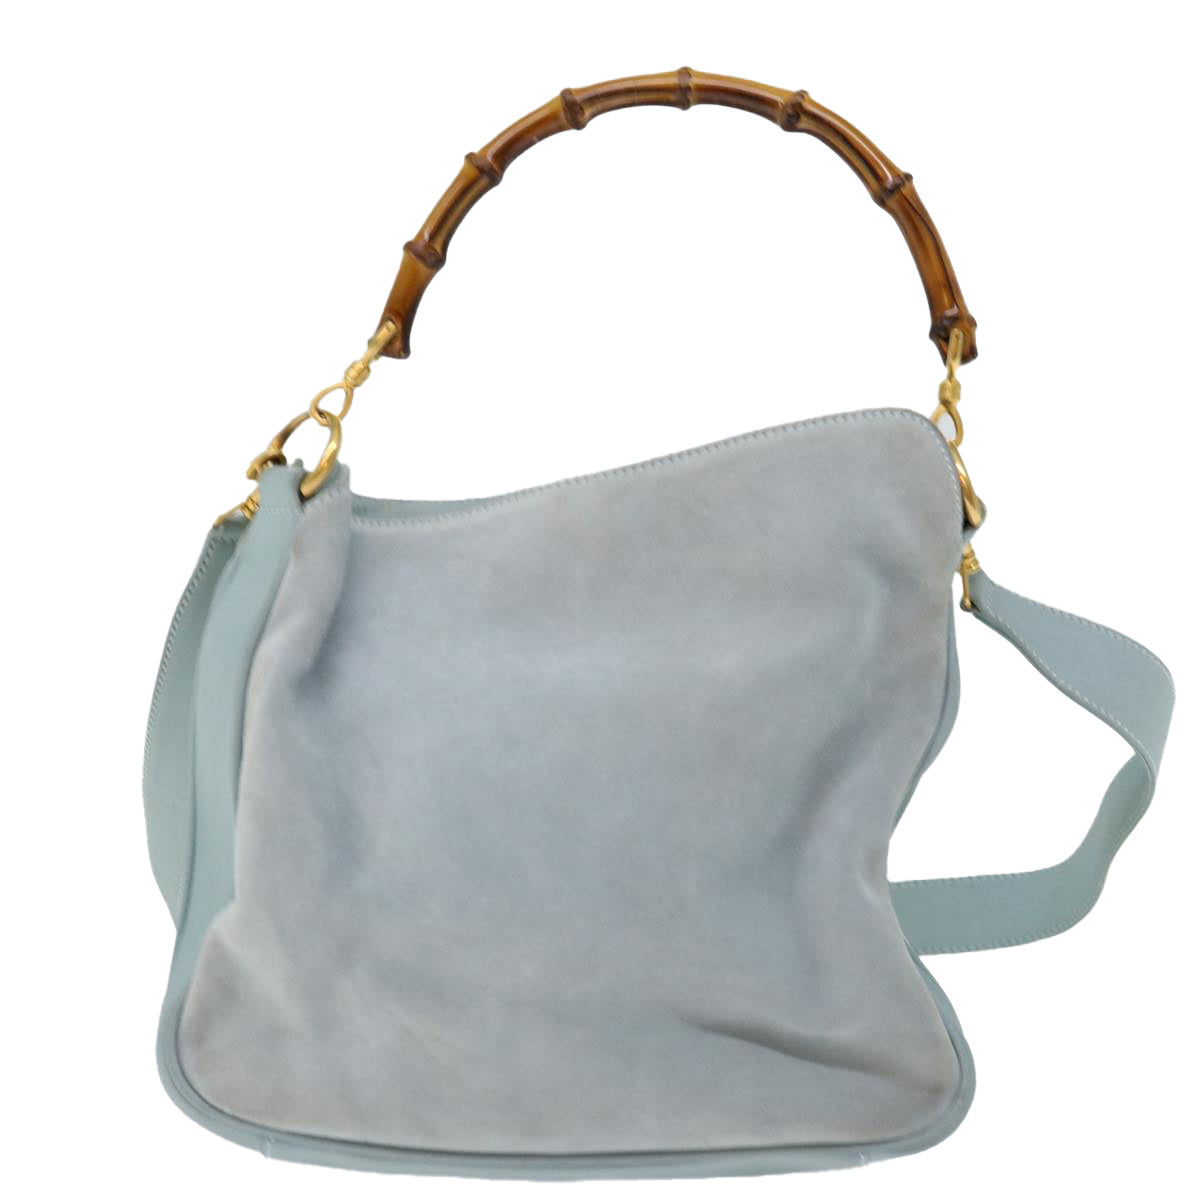 GUCCI Bamboo Shoulder Bag Suede 2way Light Blue Auth 70205 - 0